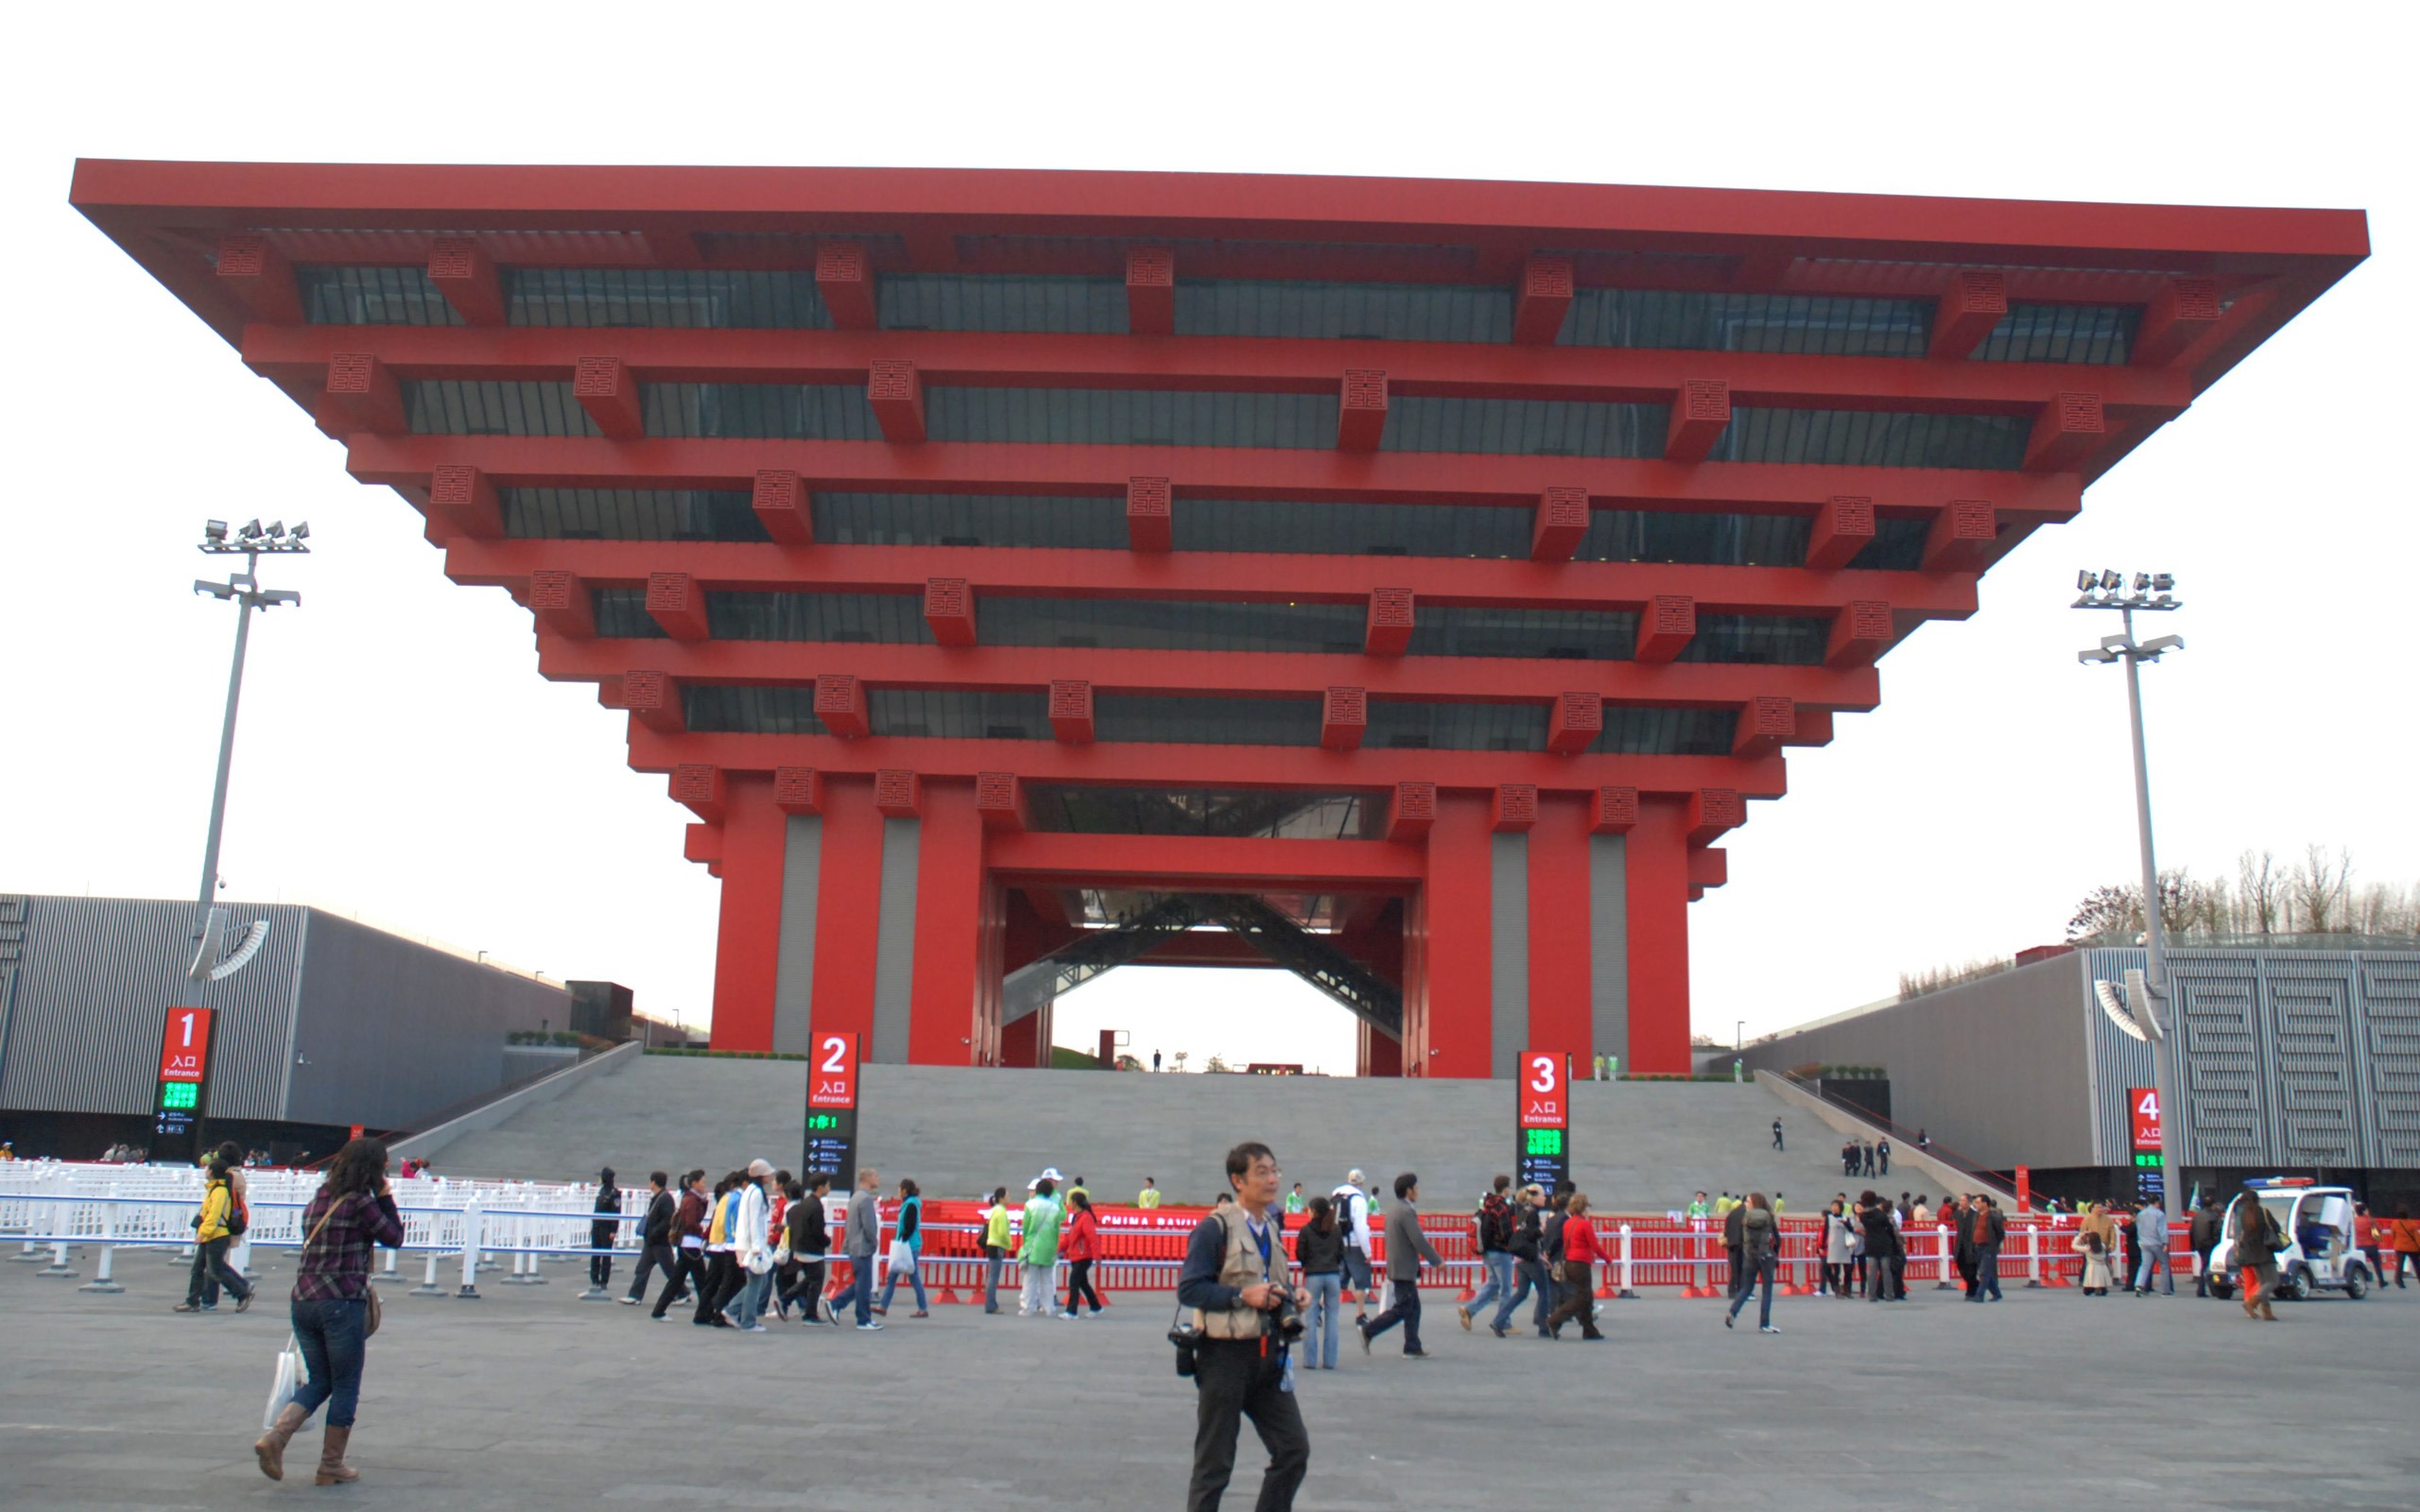 Commissioning of the 2010 Shanghai World Expo (studious works) #26 - 2560x1600